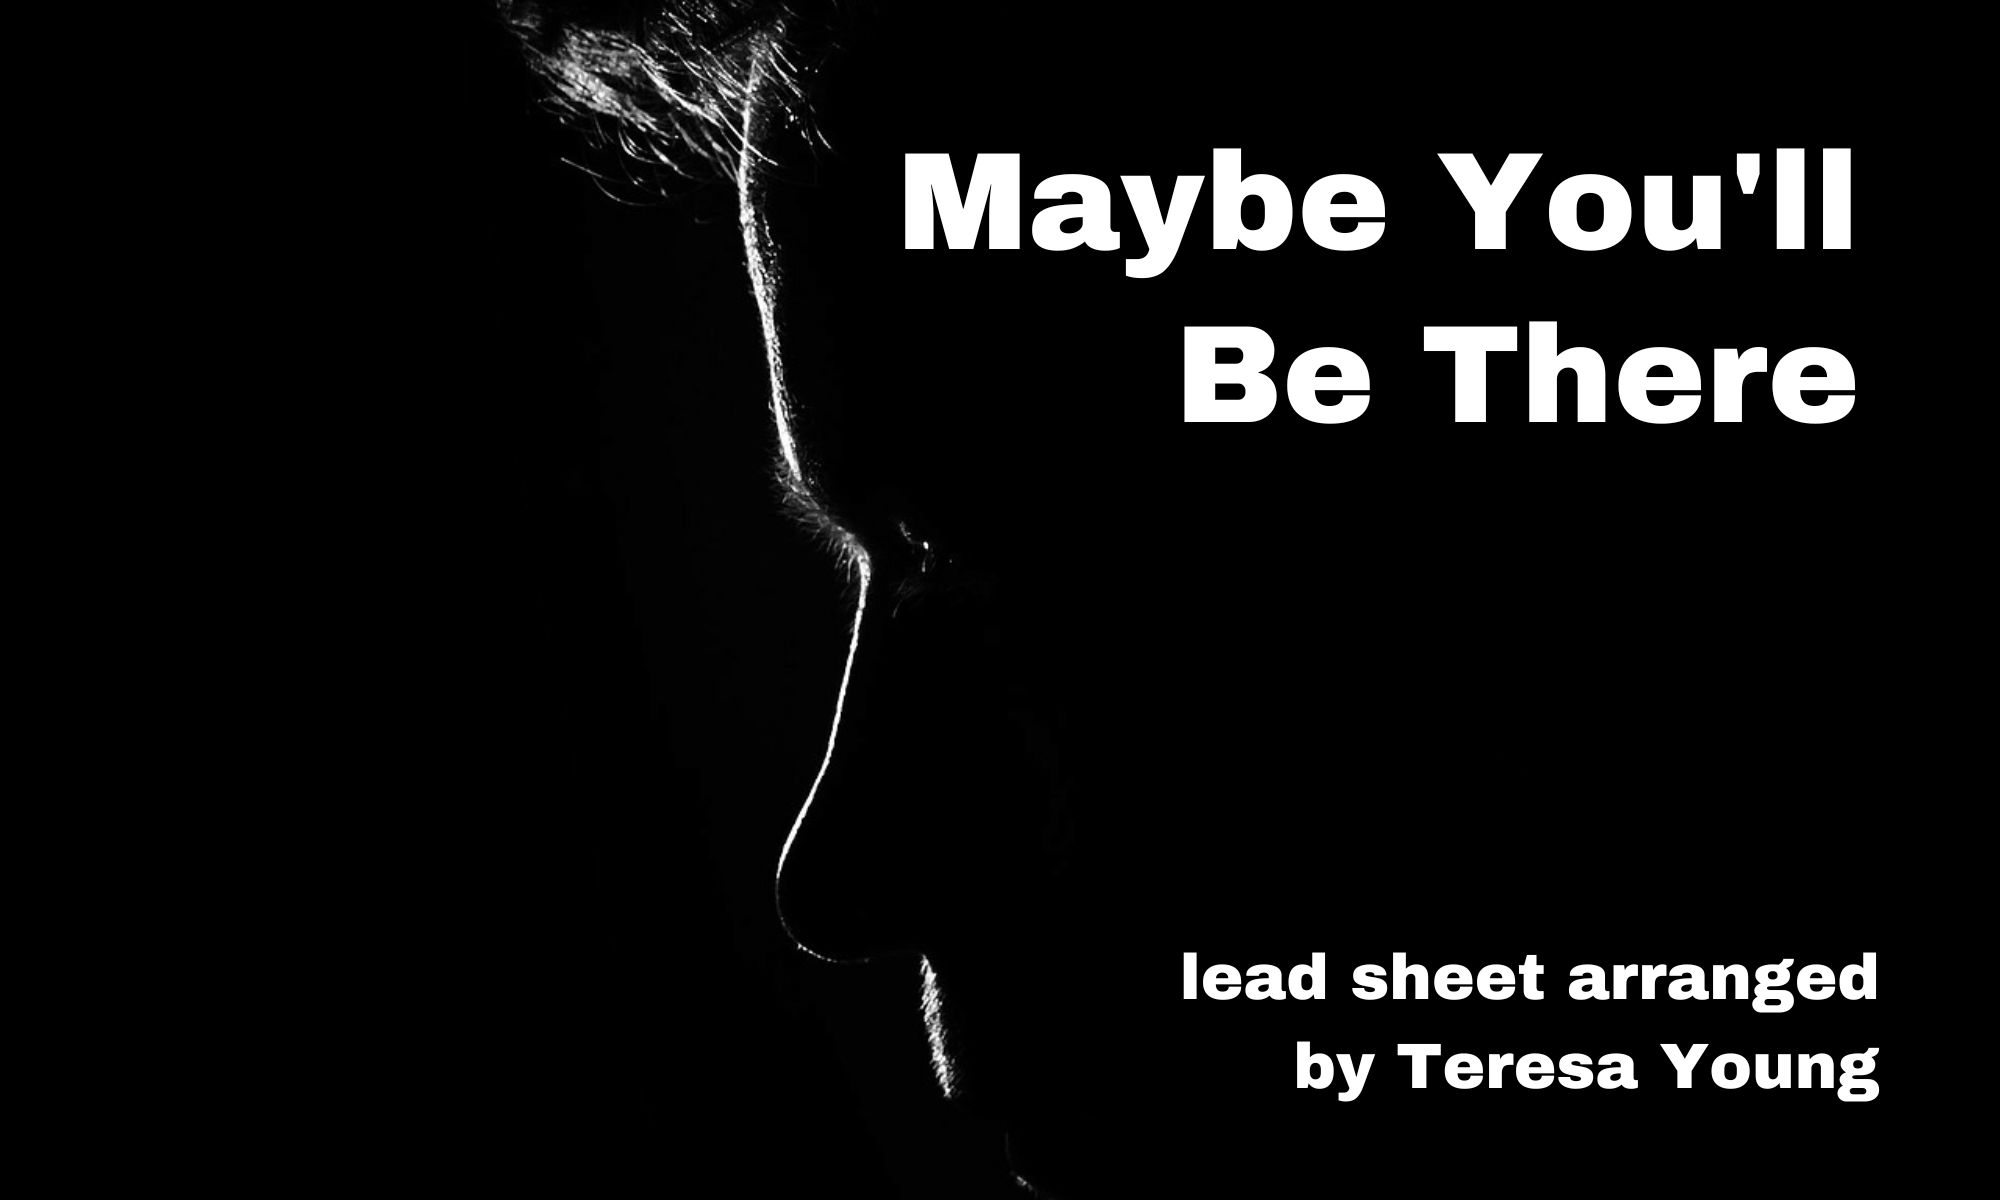 Maybe You'll Be There arr. Teresa Young